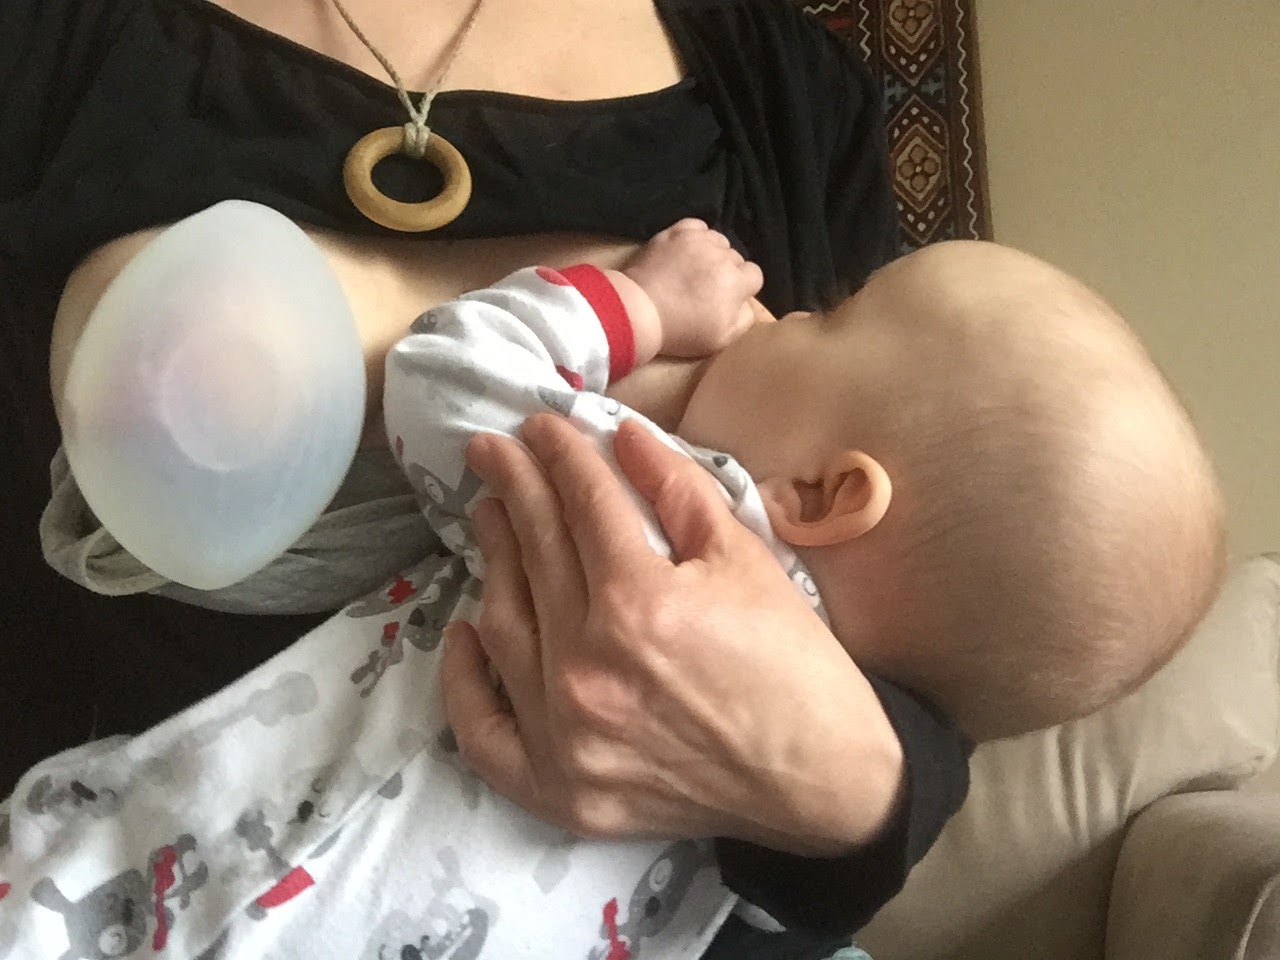 kindestcup for milk collection while breastfeeding